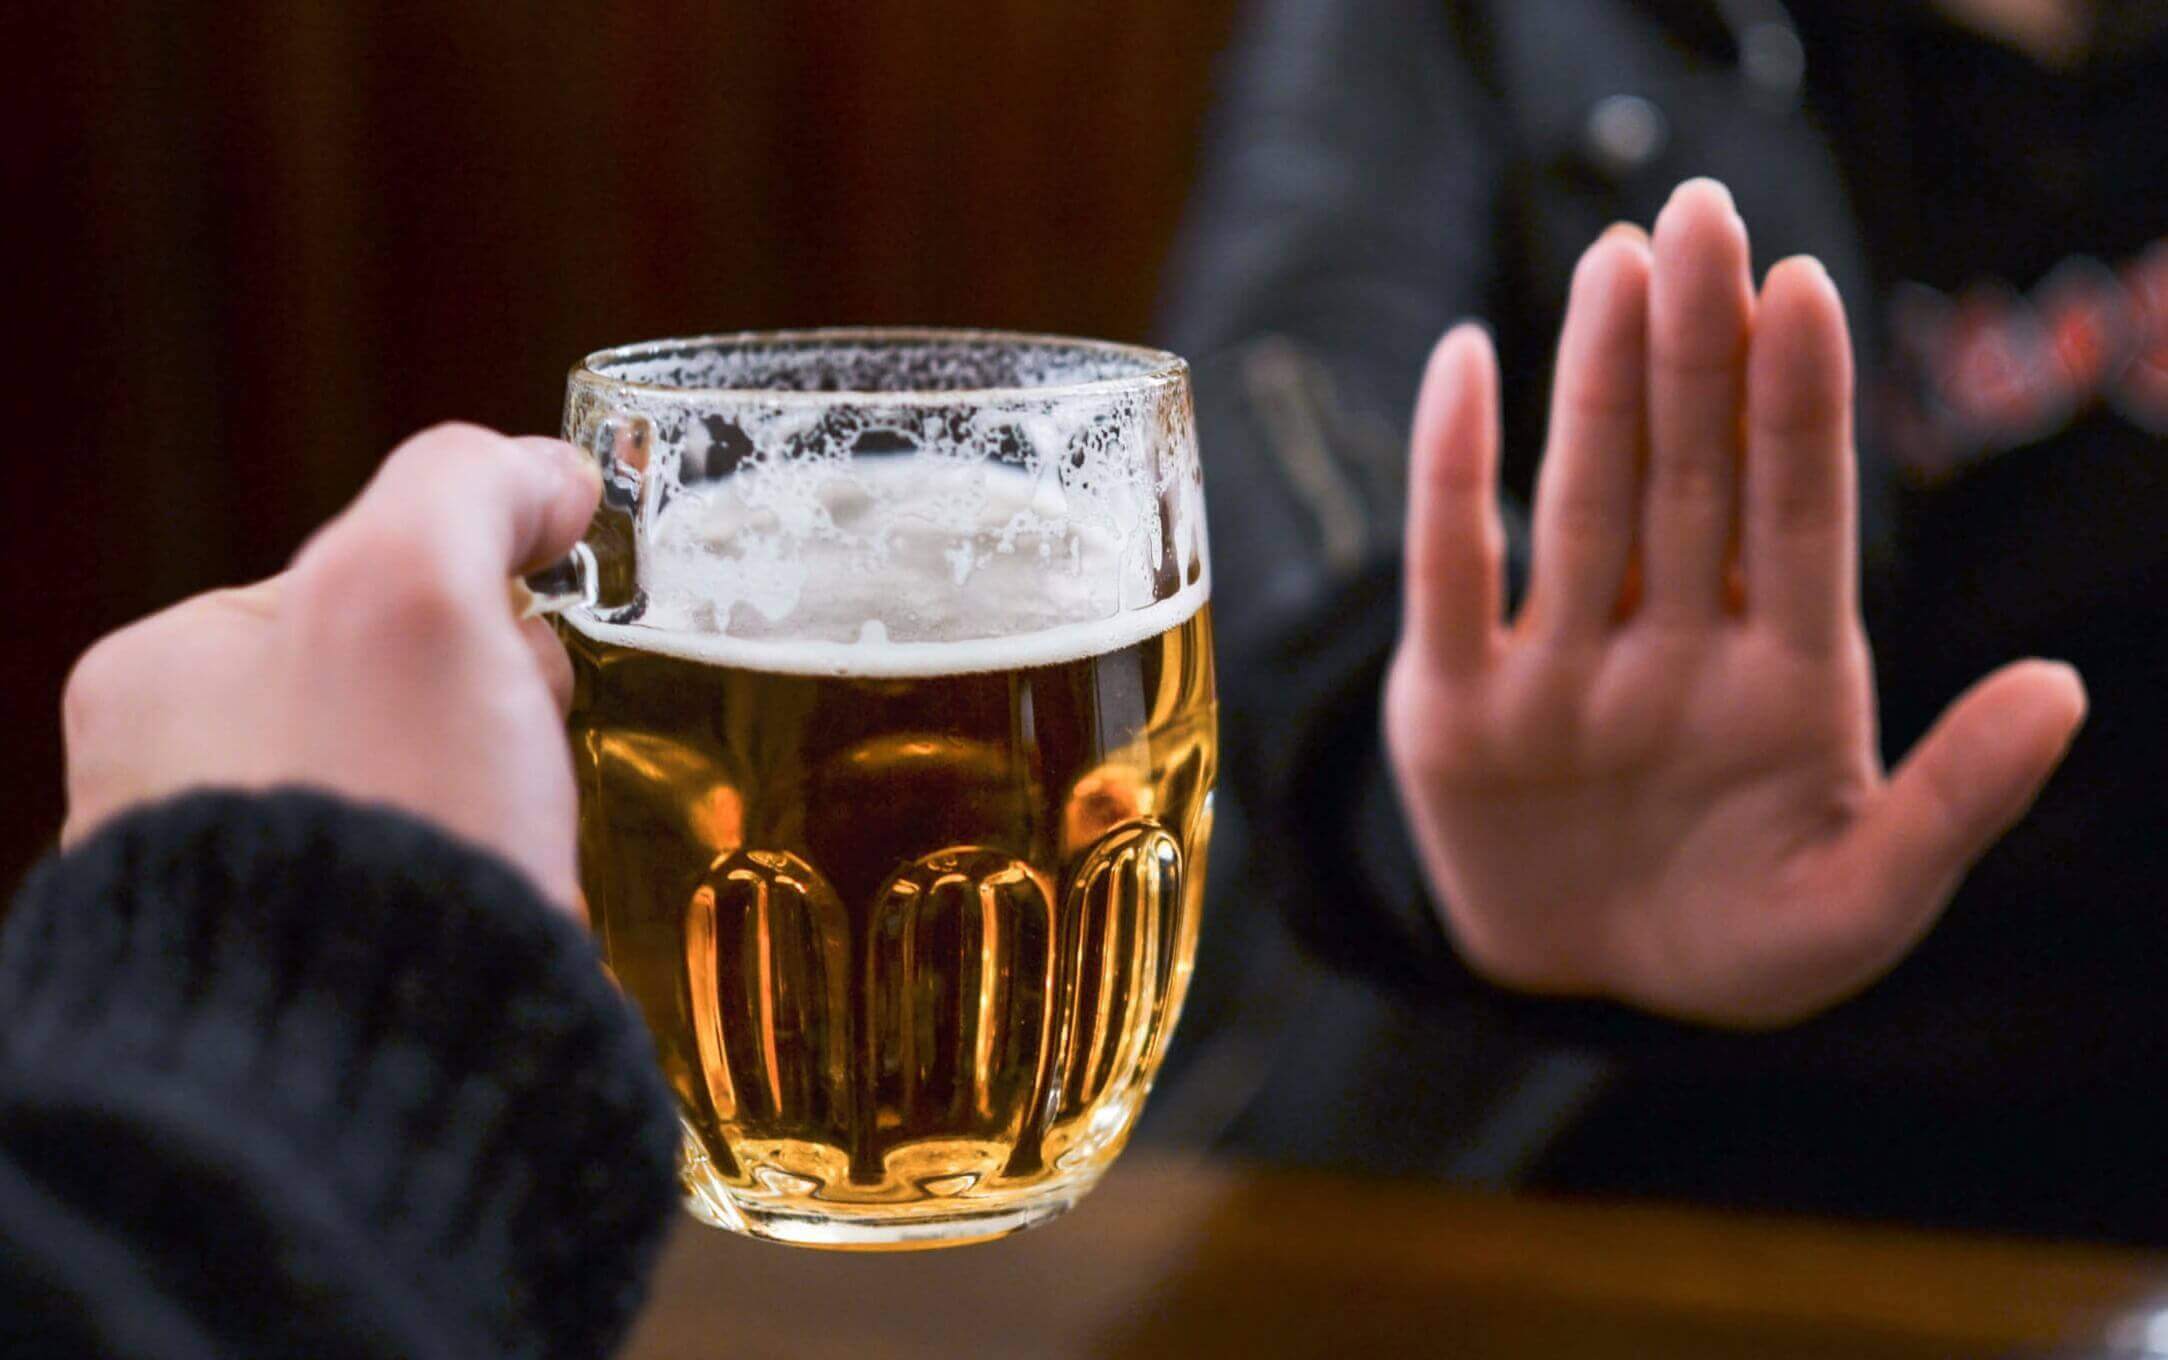 A woman turning down a glass of beer.